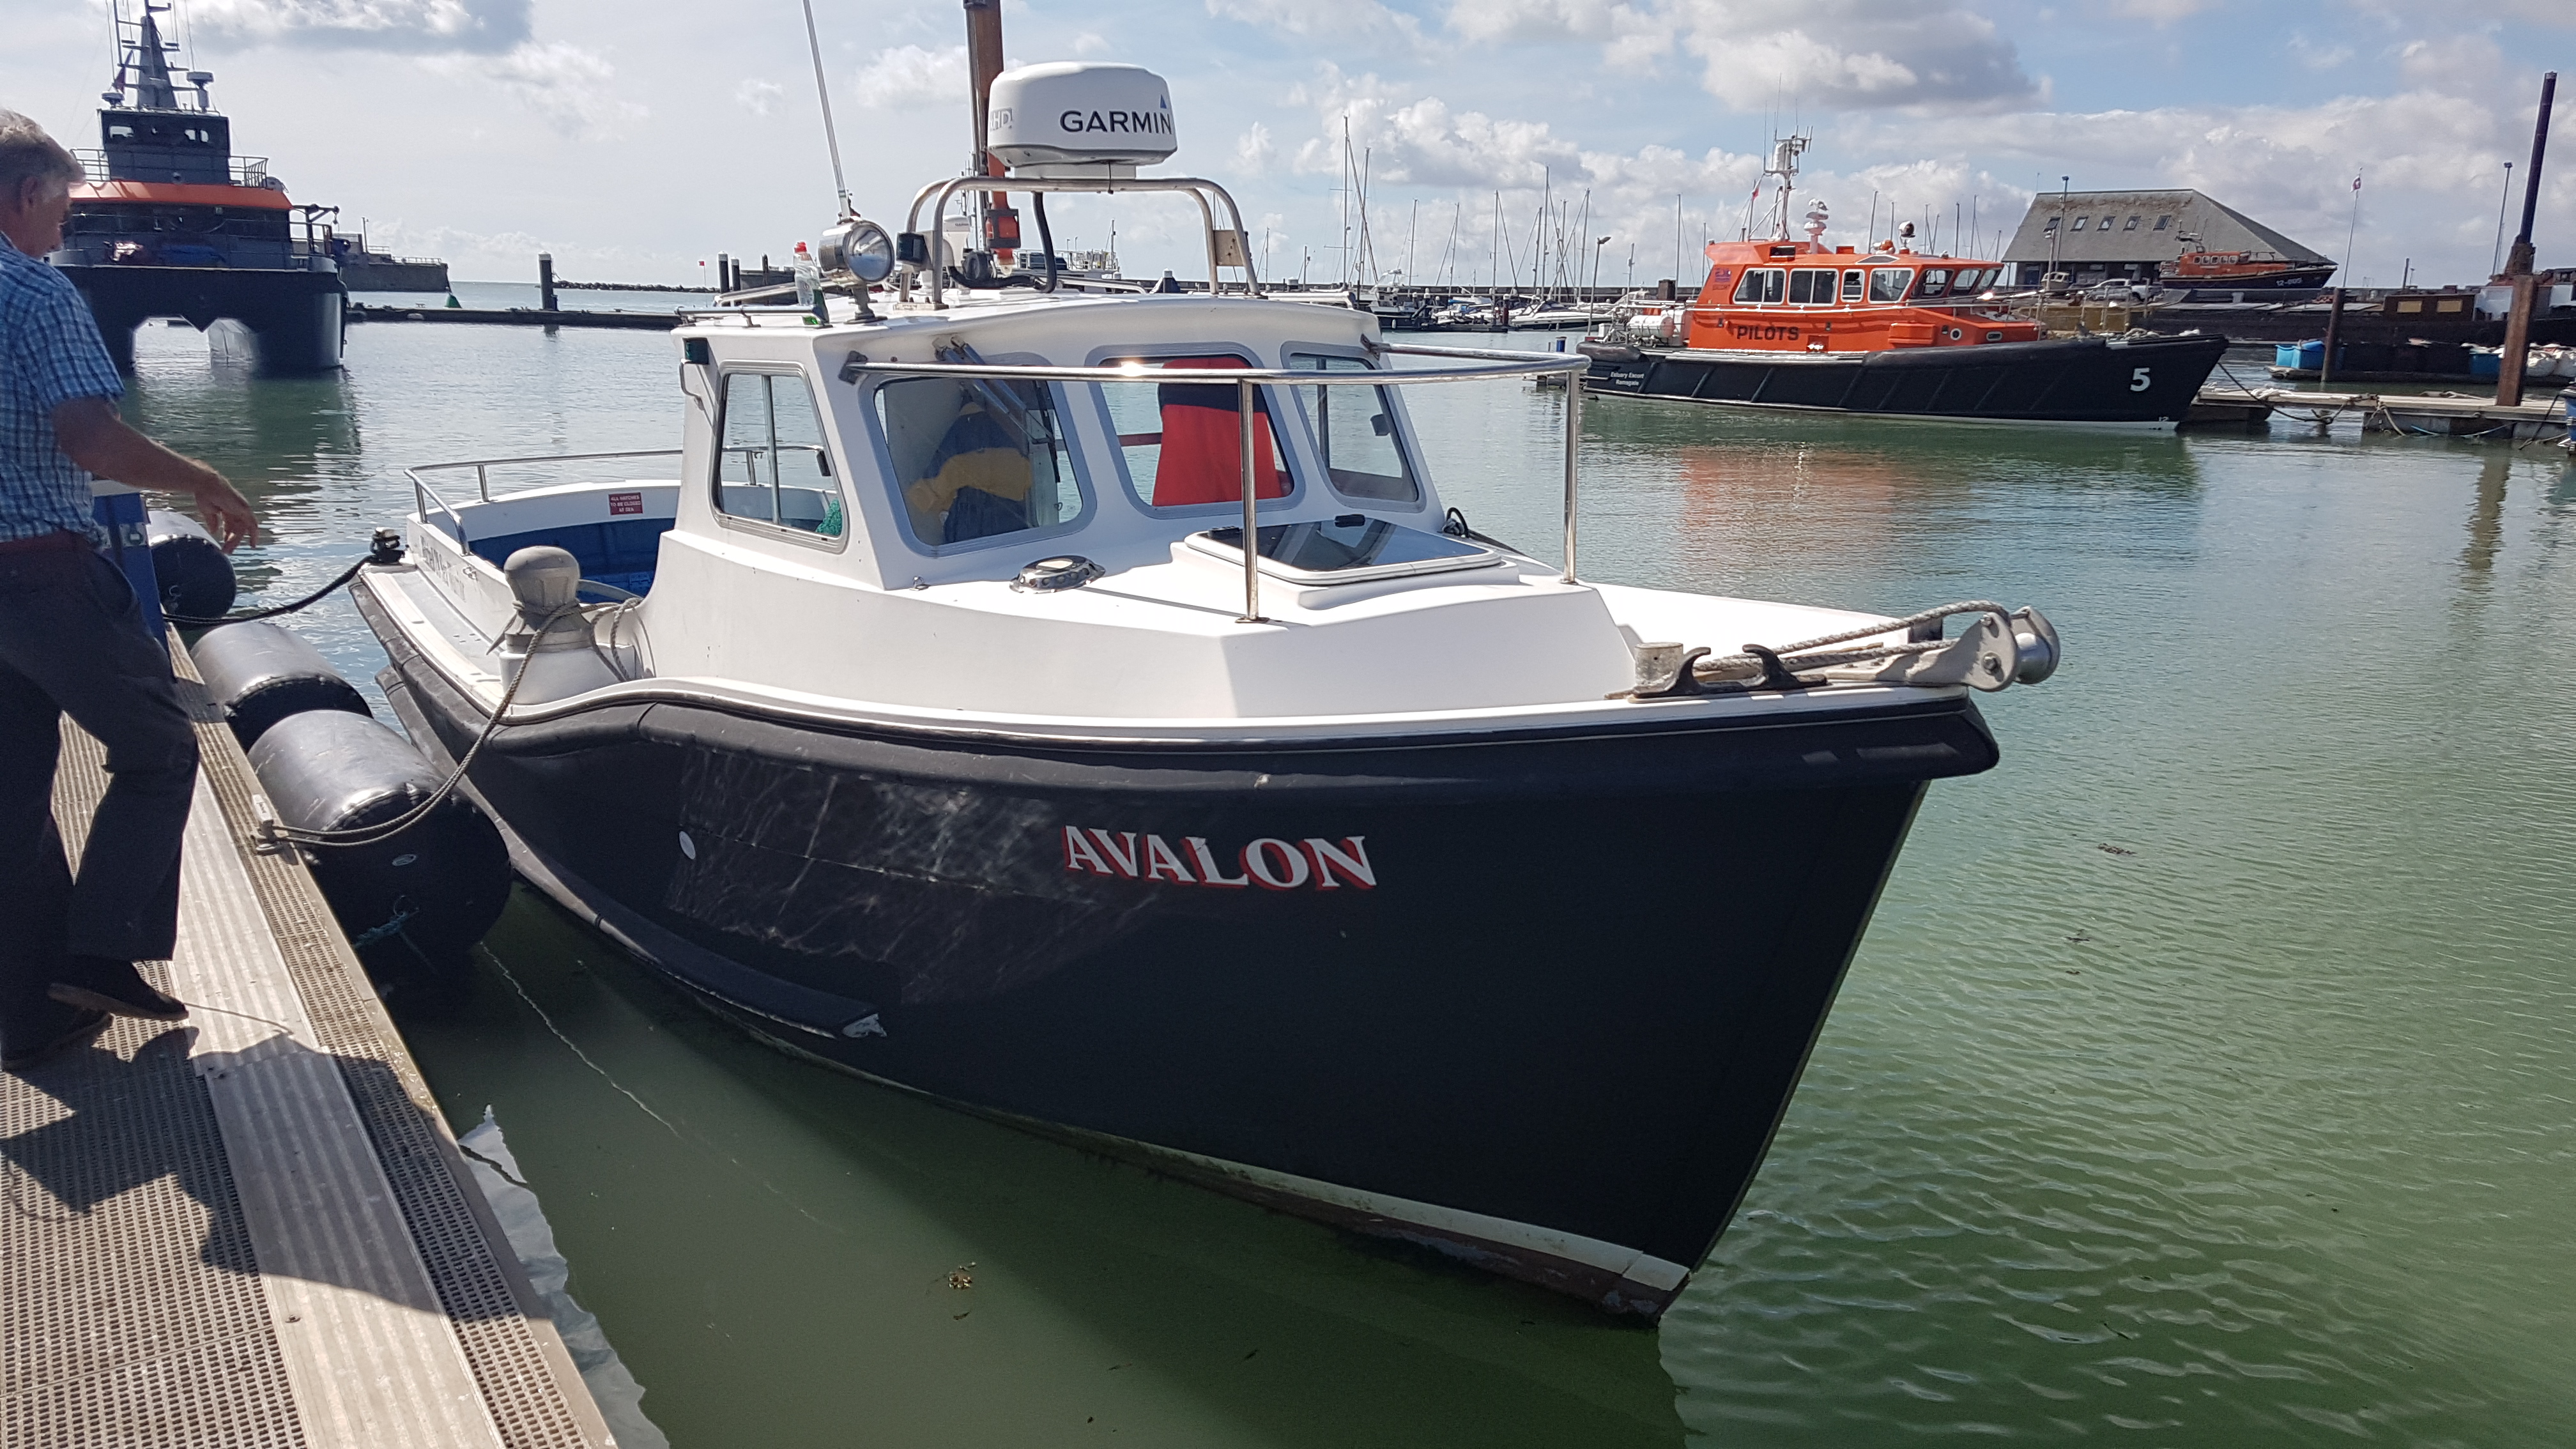 Mitchell 28 for sale UK, Mitchell boats for sale, Mitchell used boat sales,  Mitchell Fishing Boats For Sale Mitchell 28 Sea Warrior (sold) - Apollo Duck